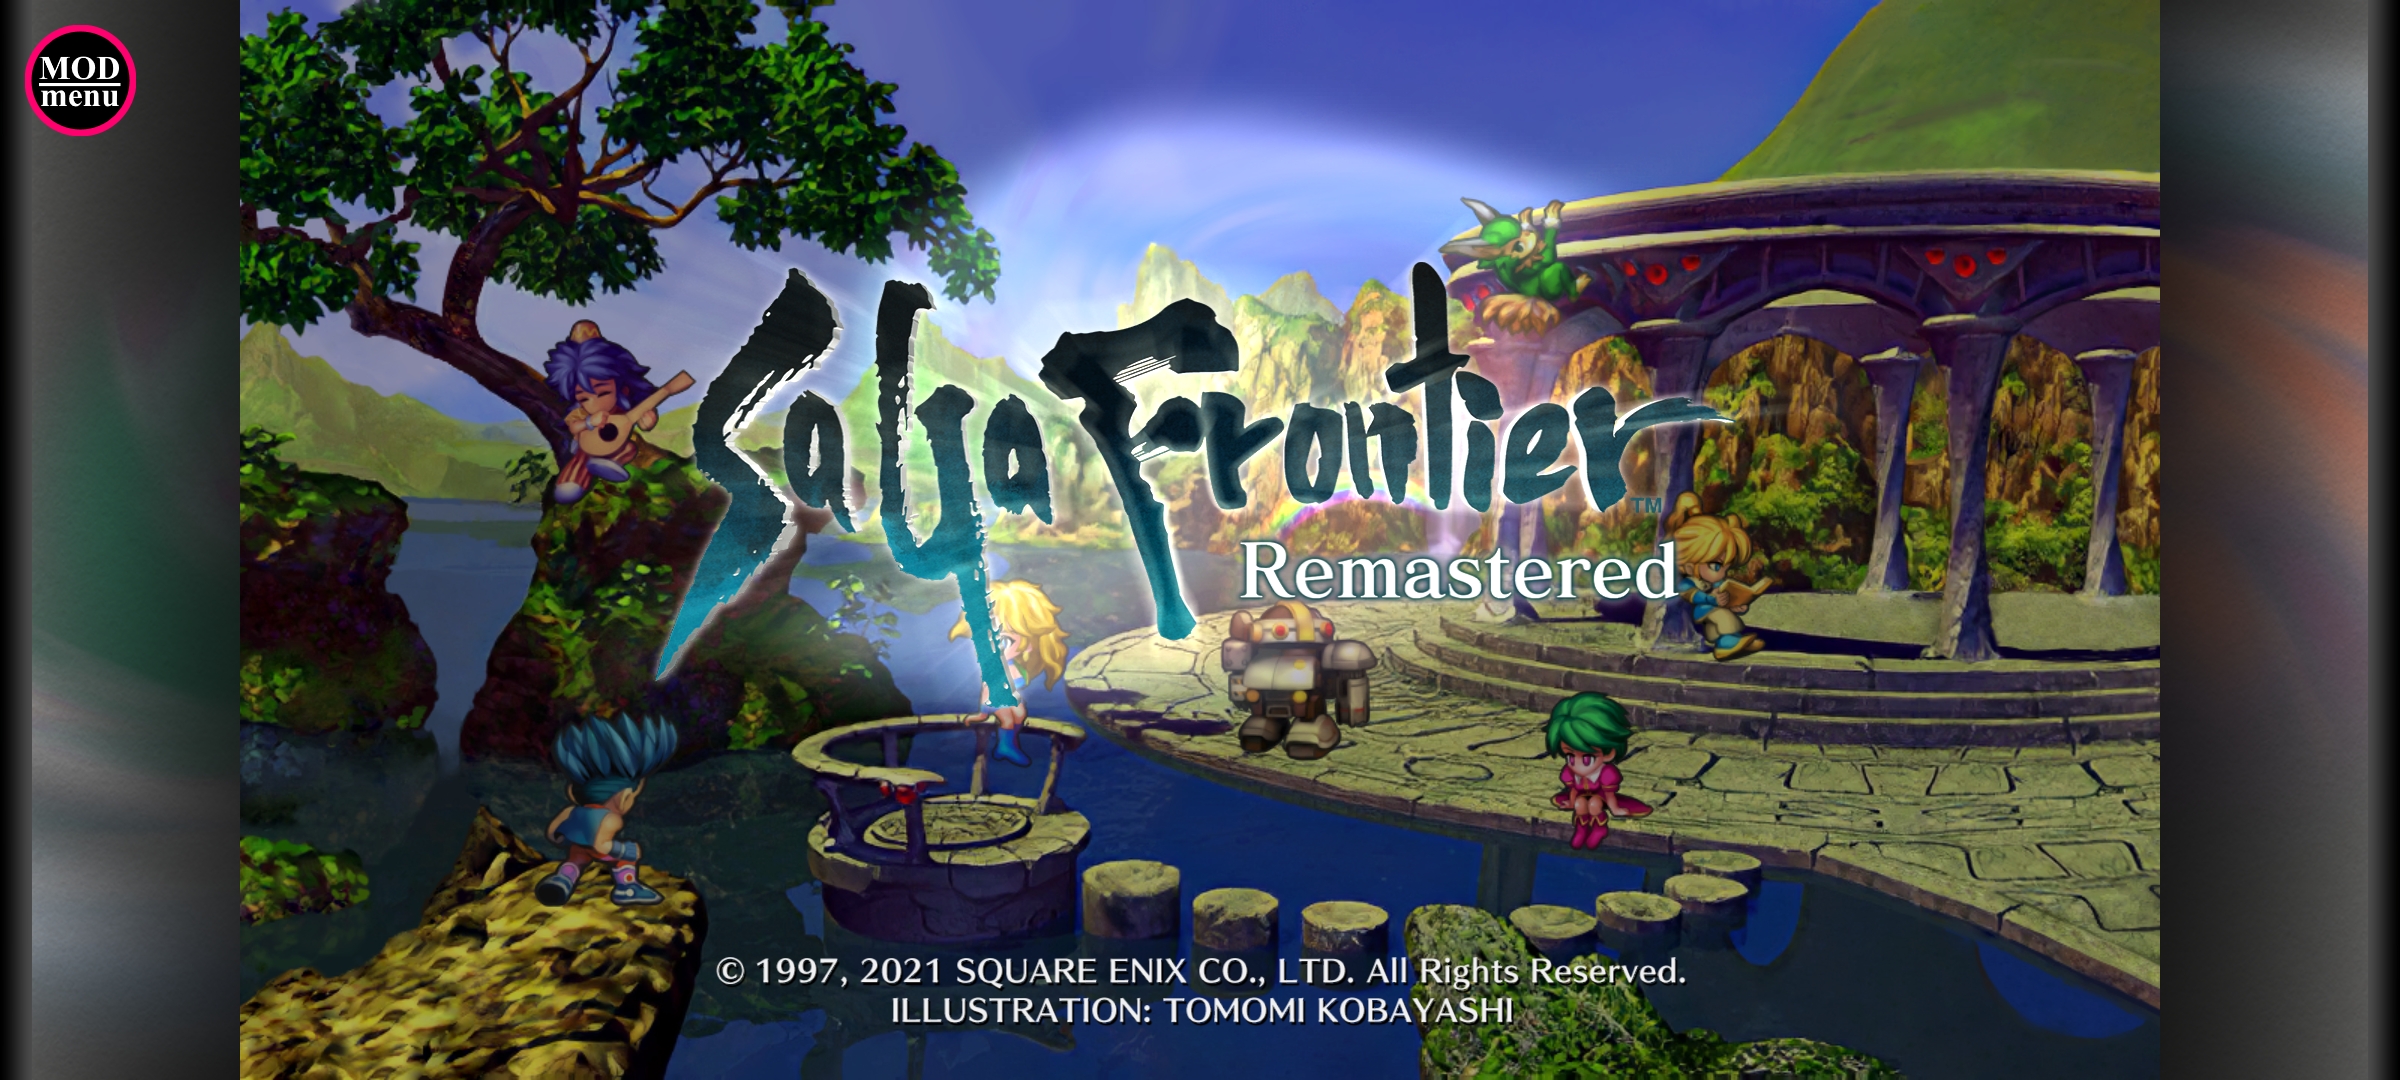 [Game Android] SaGa Frontier Remastered